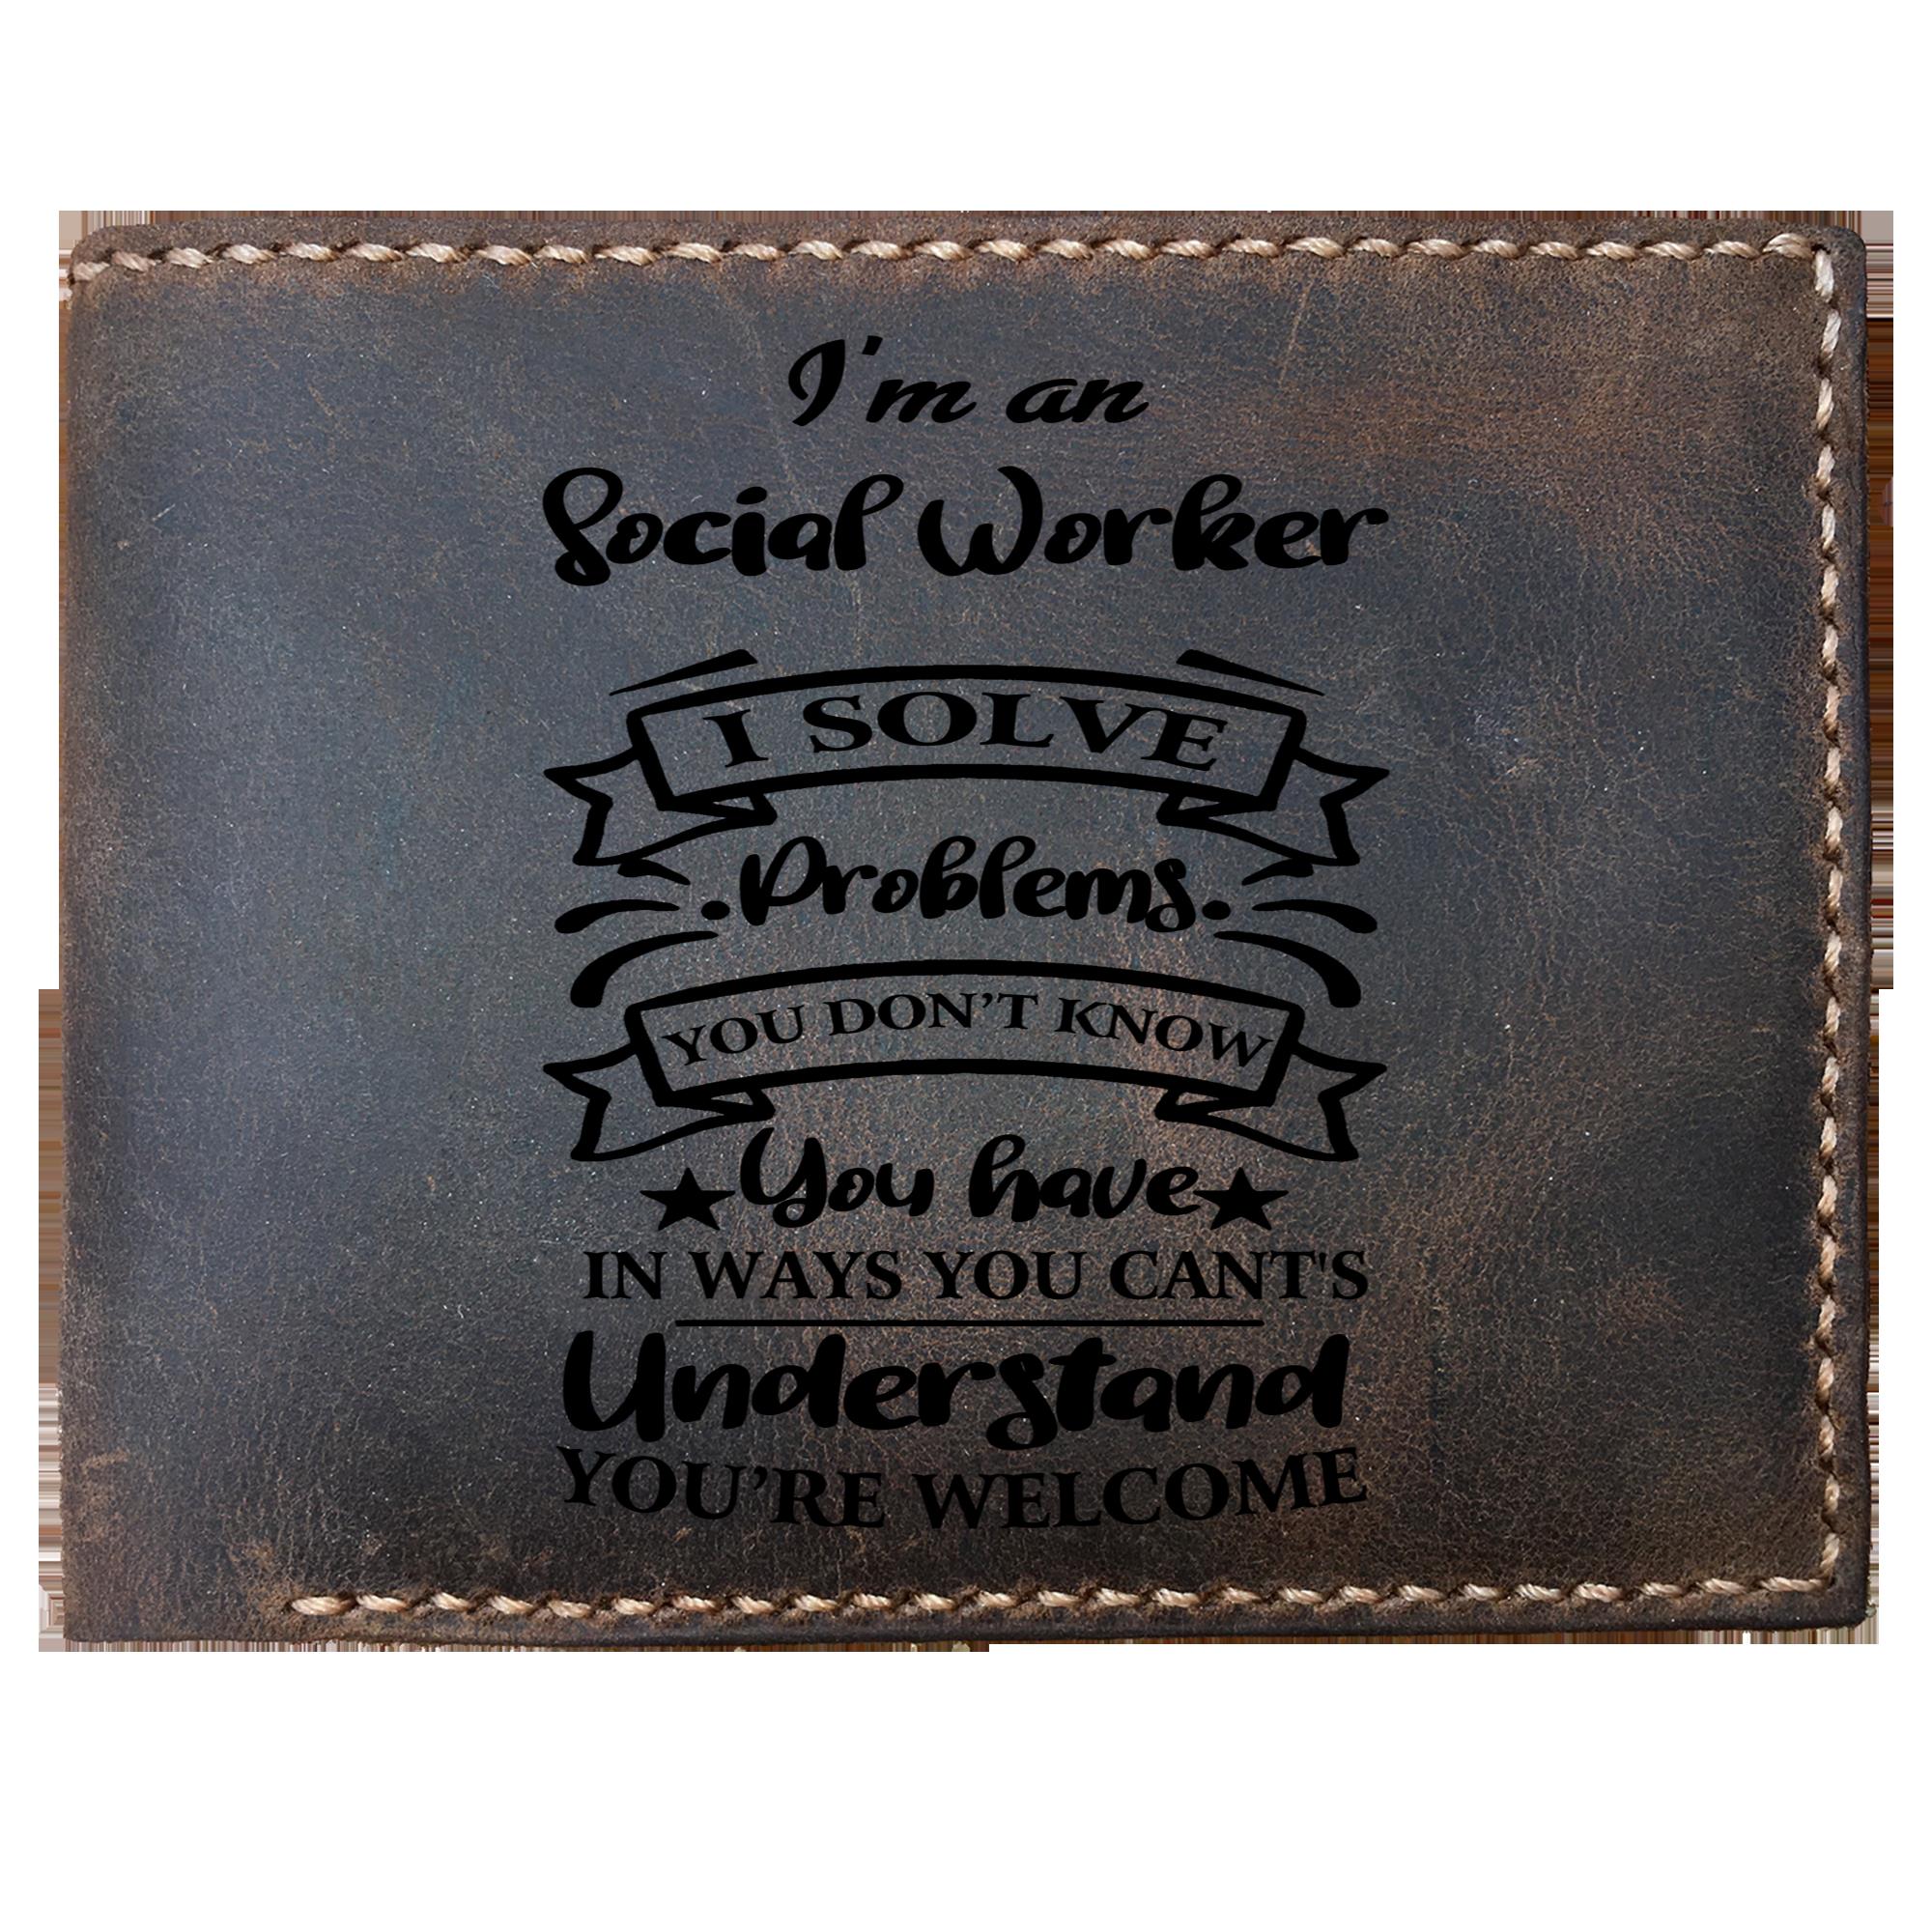 Skitongifts Funny Custom Laser Engraved Bifold Leather Wallet For Men, I'm an Social Worker Solve Problems, Father's Day Gifts